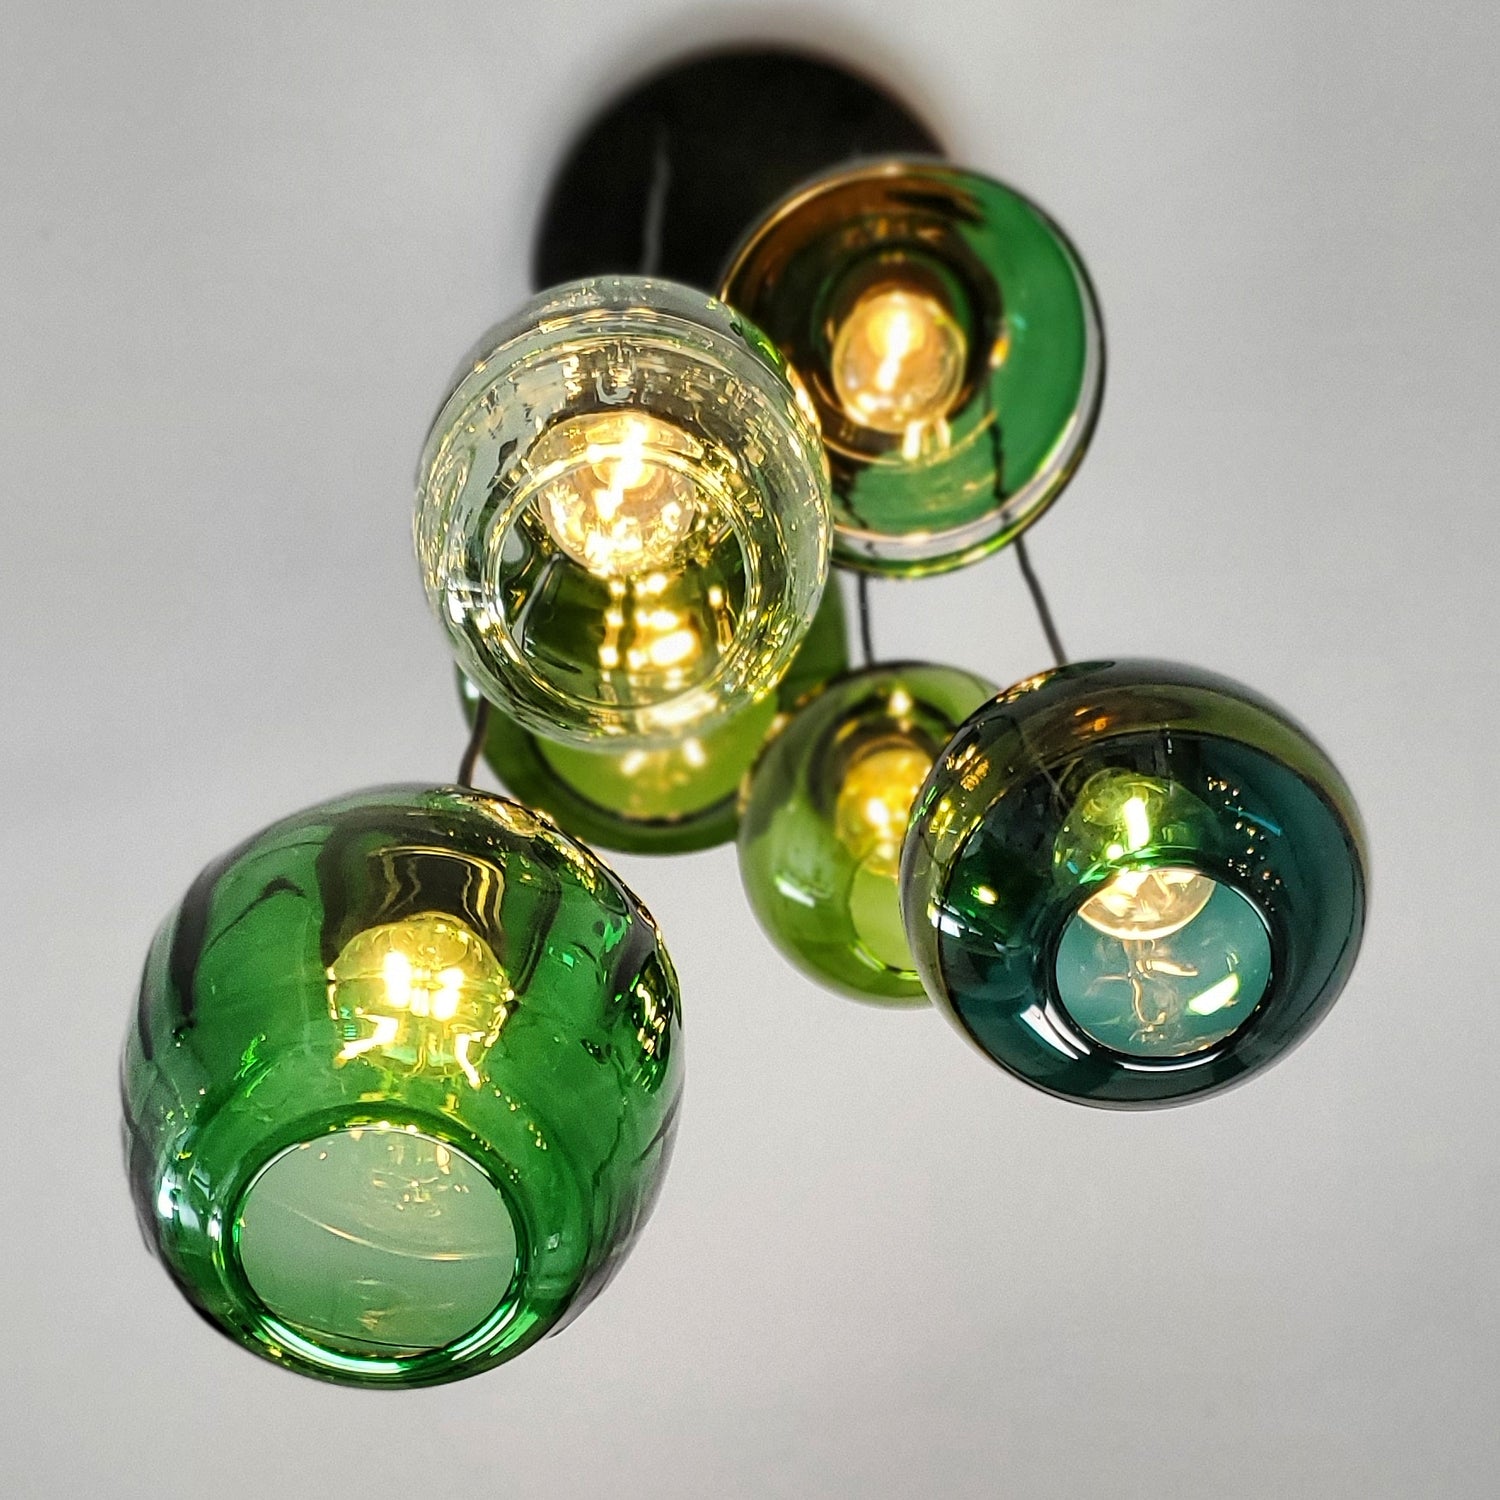 A chandelier hanging from the ceiling with different shades of green